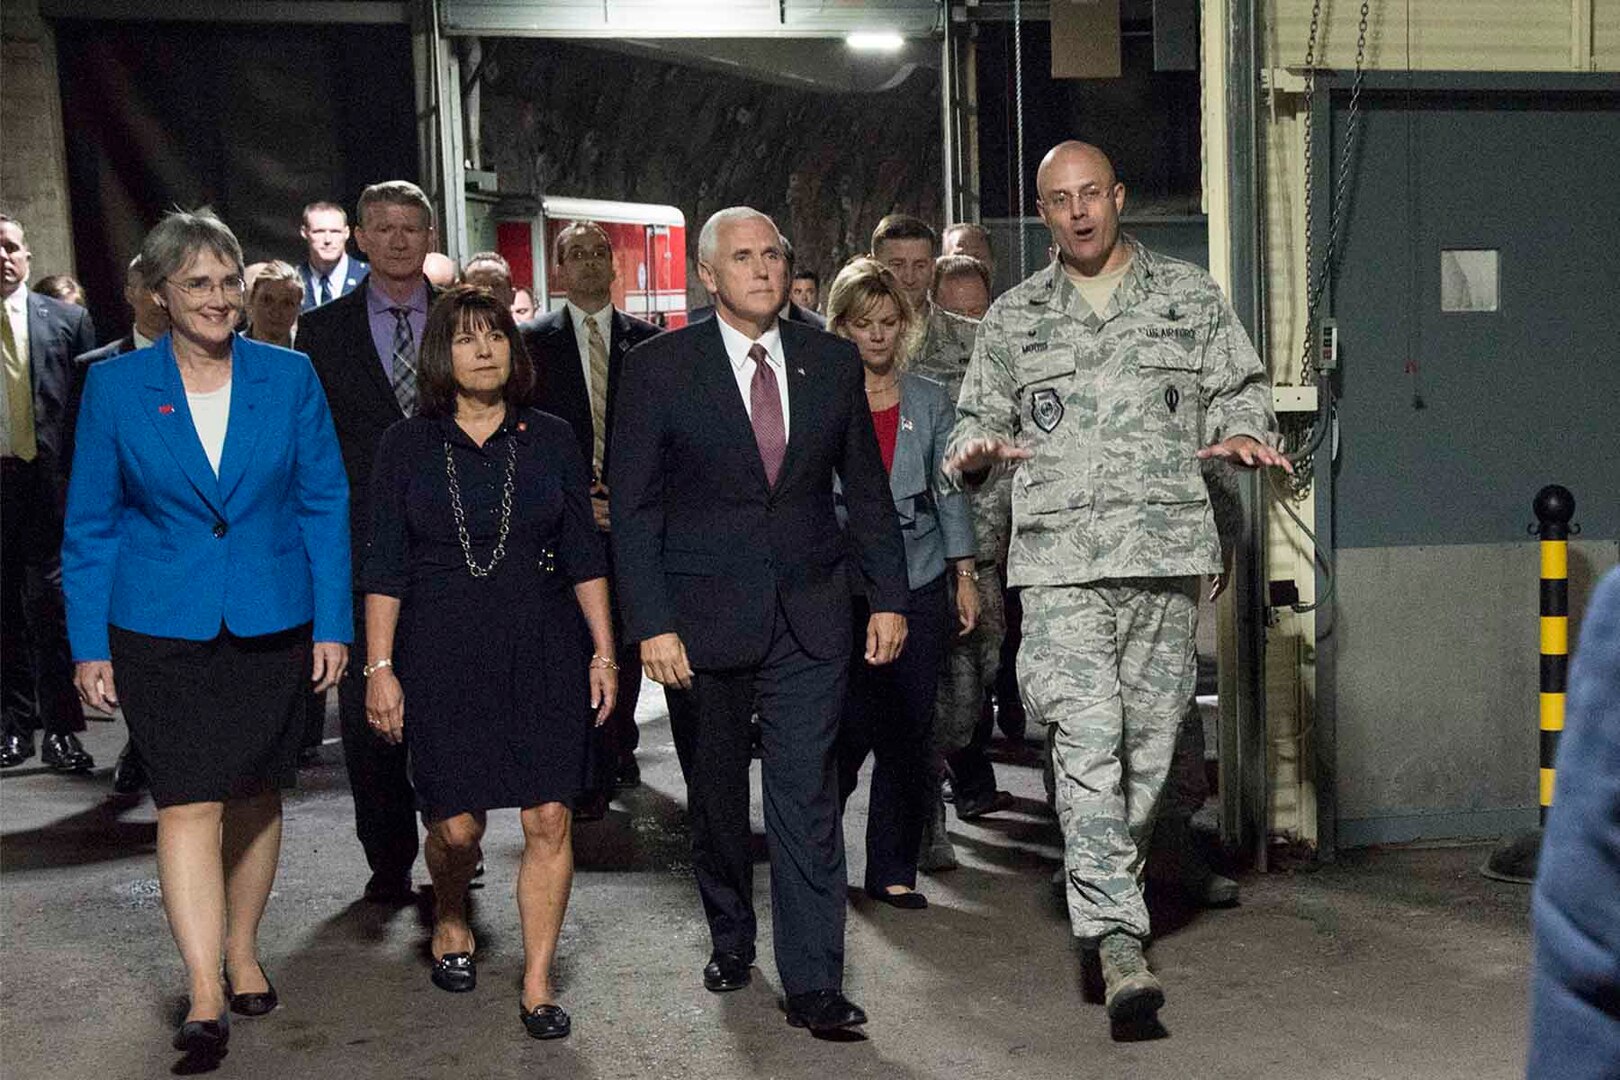 CHEYENNE MOUNTAIN AIR FORCE STATION, Colo. - Col. Robert Moose, 721st Mission Support Group commander, gives a guided tour to Vice President Mike
Pence and the Secretary of the Air Force Heather Wilson during a visit to Cheyenne Mountain Air Force Station June 23, 2017.  As an integral part of the 21st Space Wing, Cheyenne Mountain AFS provides and employs global
capabilities to ensure space superiority to defend our nation and allies. (U.S. Air Force photo by Senior Airman Dennis Hoffman)
 
